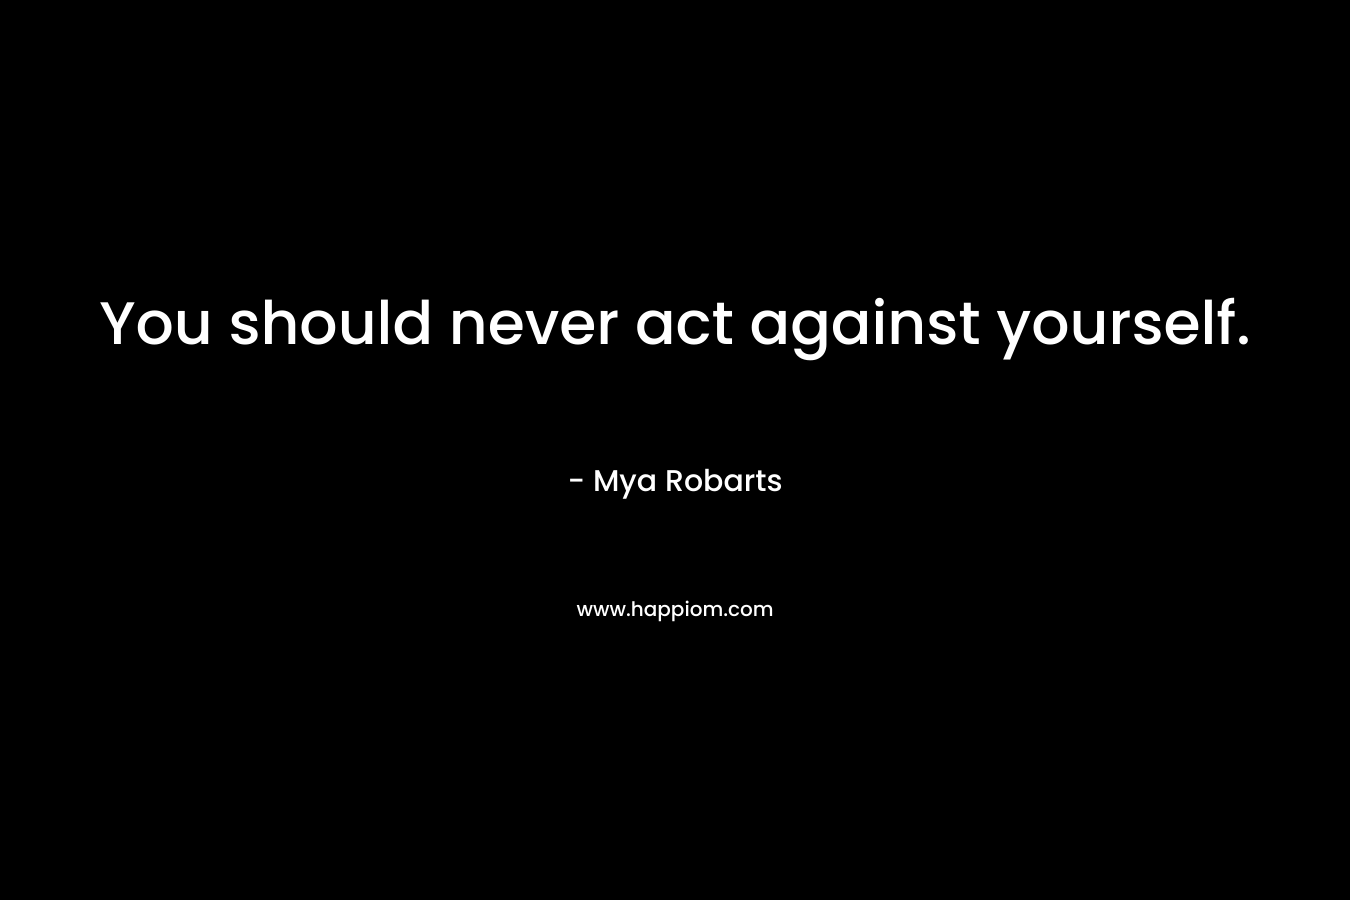 You should never act against yourself.